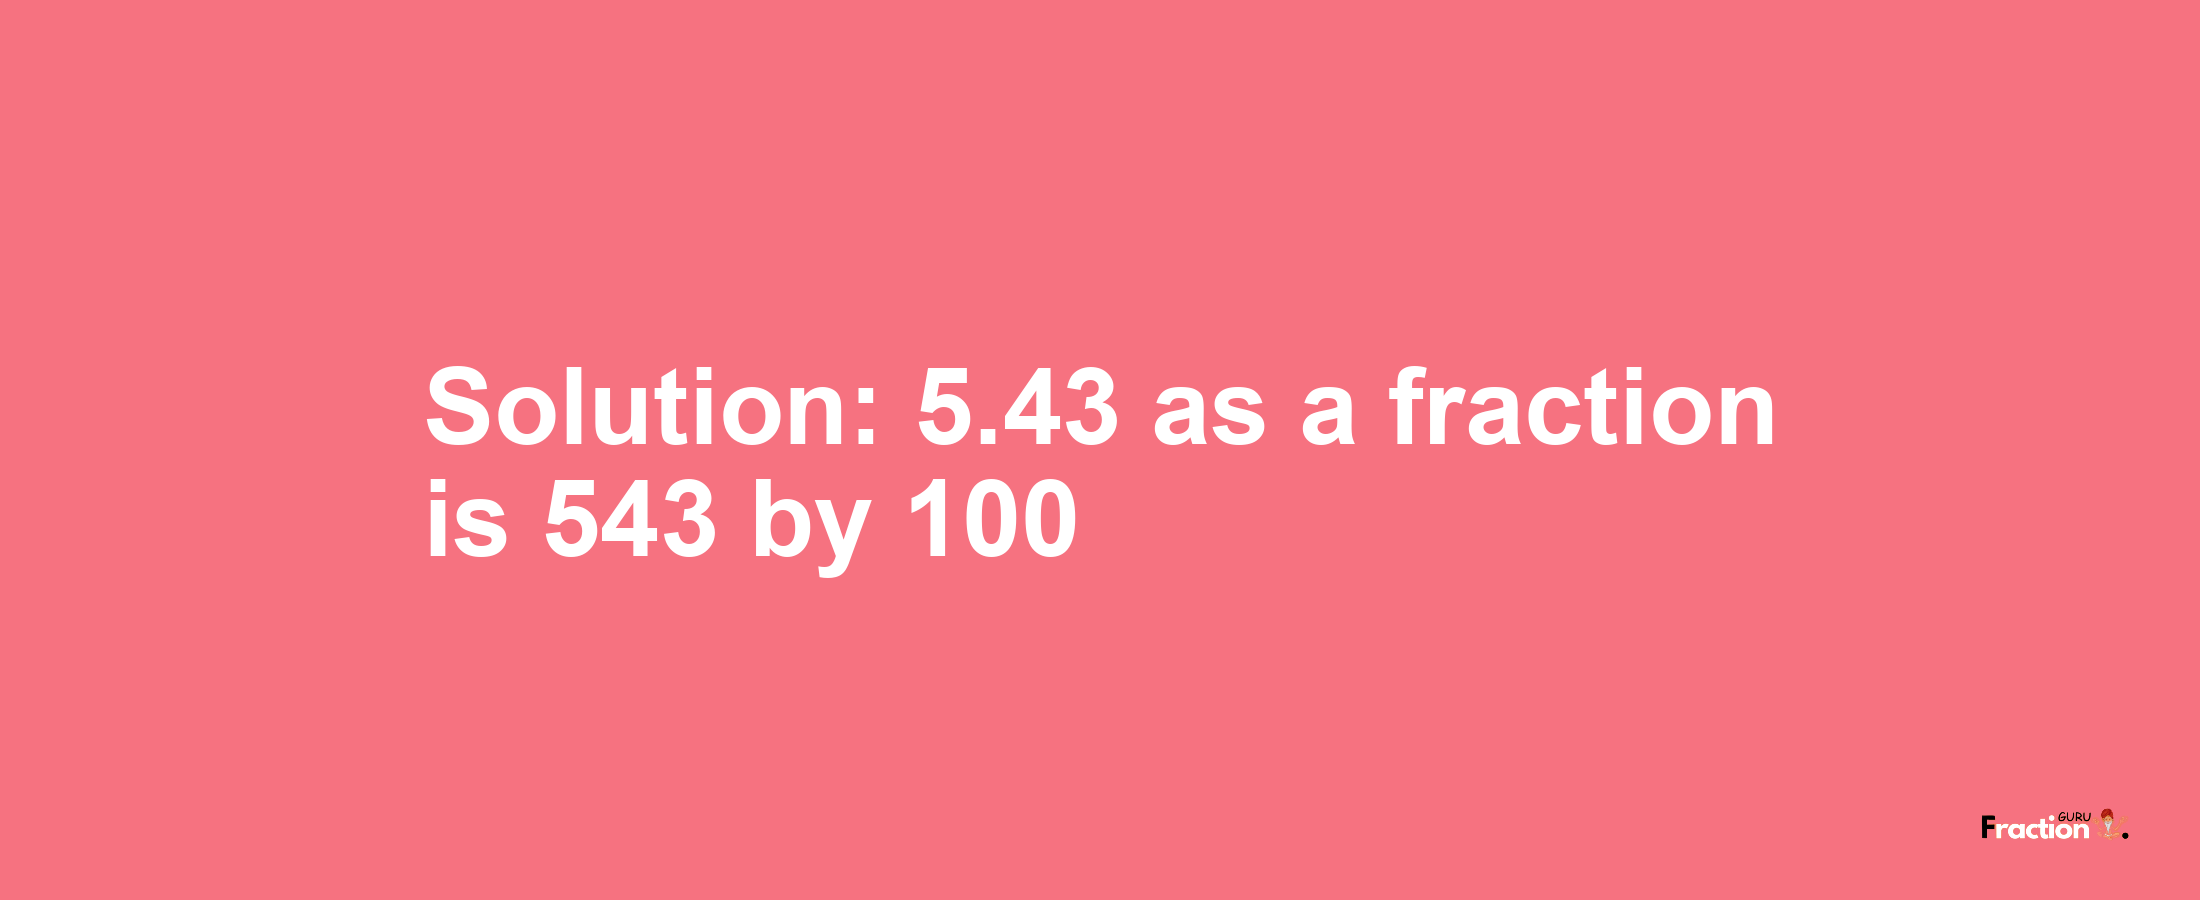 Solution:5.43 as a fraction is 543/100